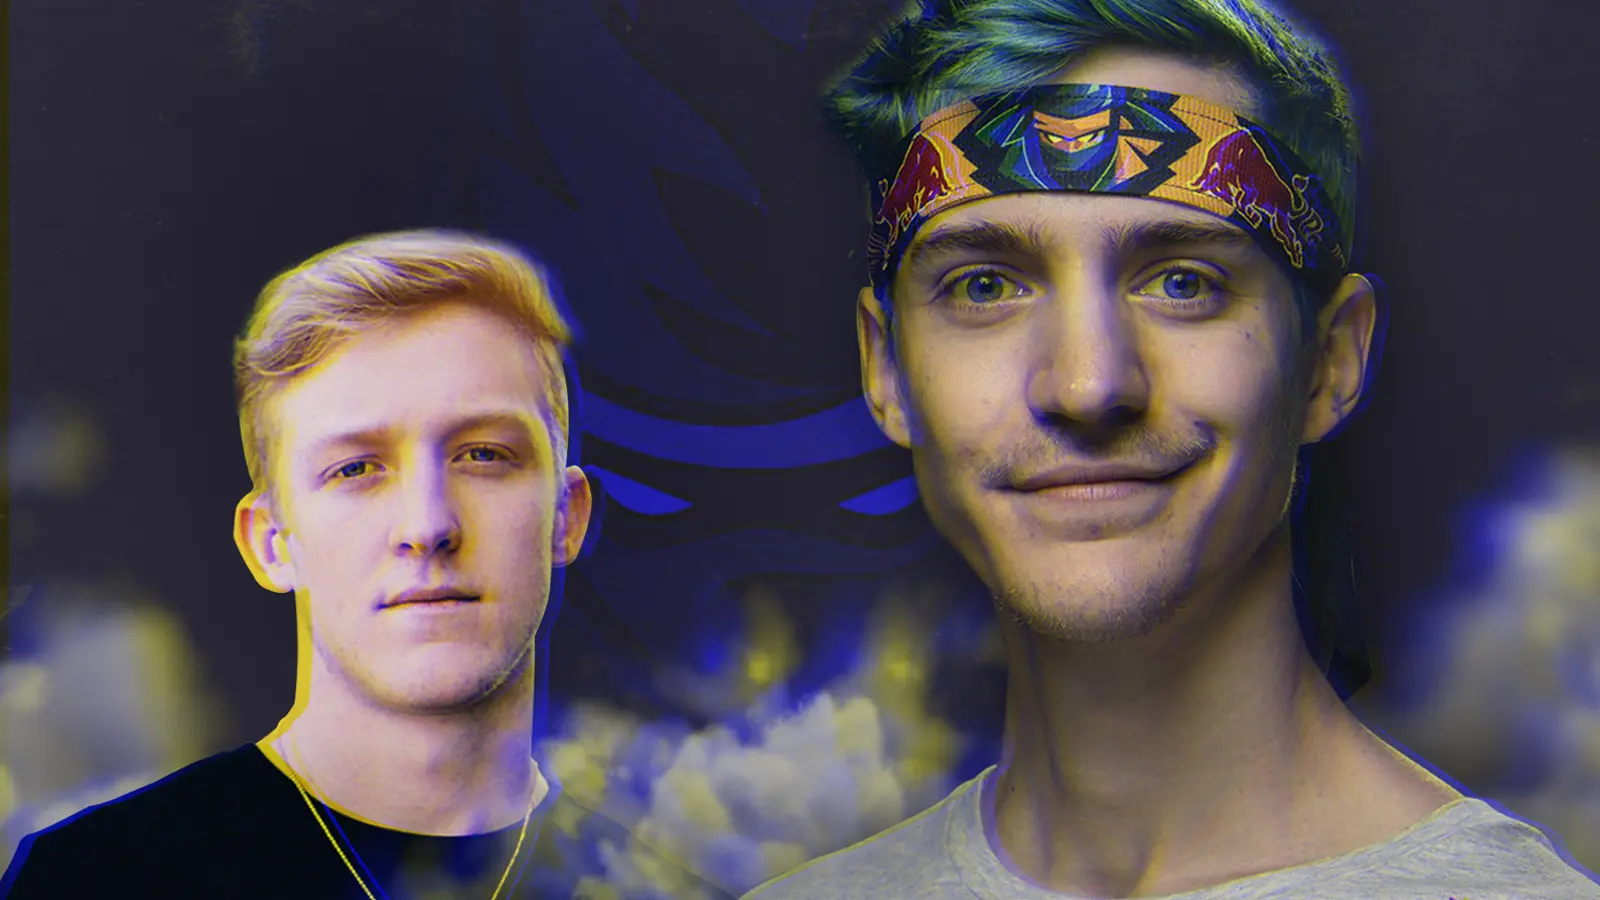 Tfue and Ninja, two of the top twitch streamers.